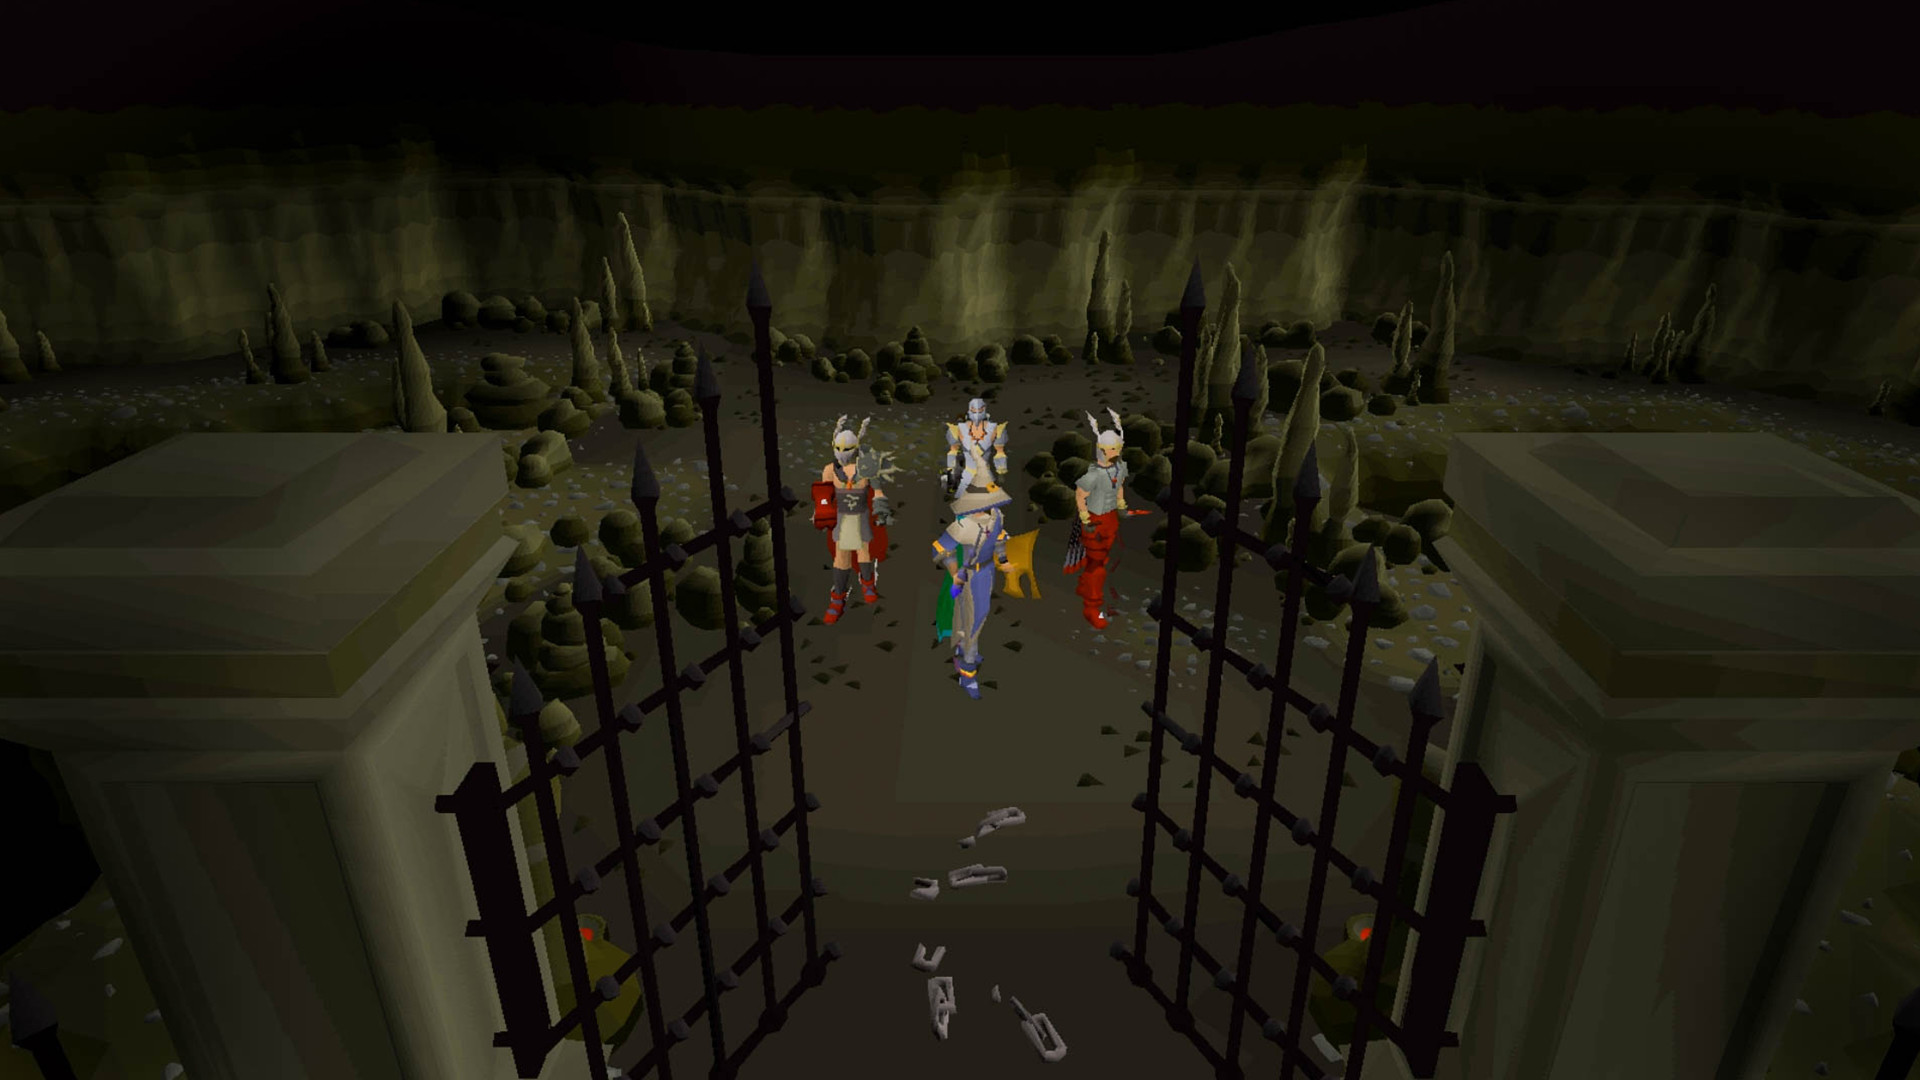 The game is a cross between Old School RuneScape offering players, Online Event